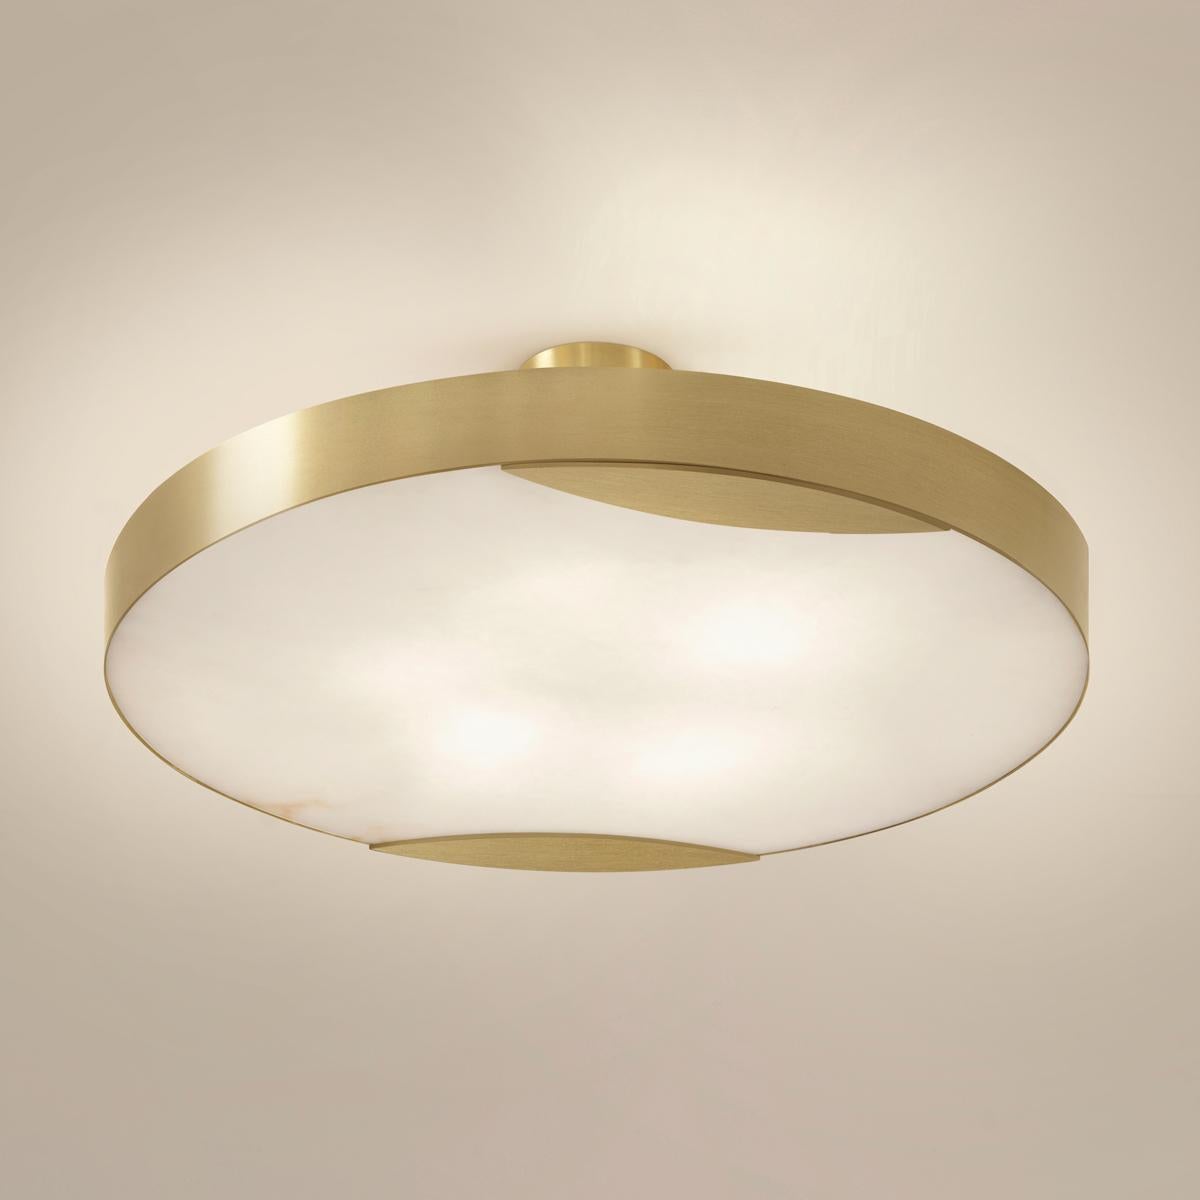 Brass Cloud N.1 Ceiling Light by Gaspare Asaro-Polished Nickel Finish For Sale